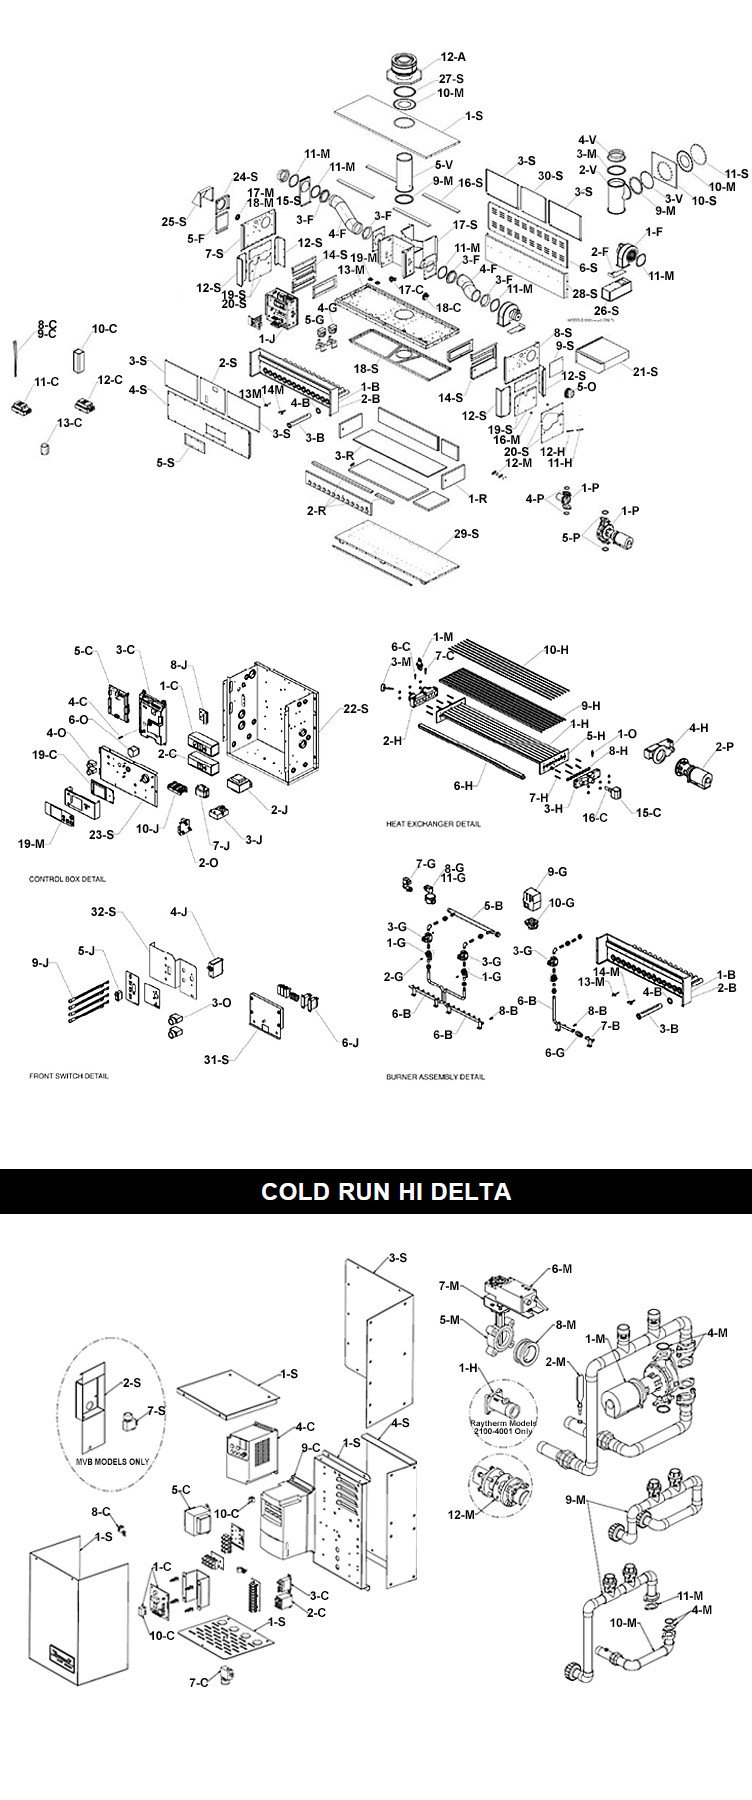 Raypak HI Delta Cold Run P-502C Commercial Indoor-Outdoor Swimming Pool Heater | Natural Gas 500,000 BTUH | 016084 Parts Schematic